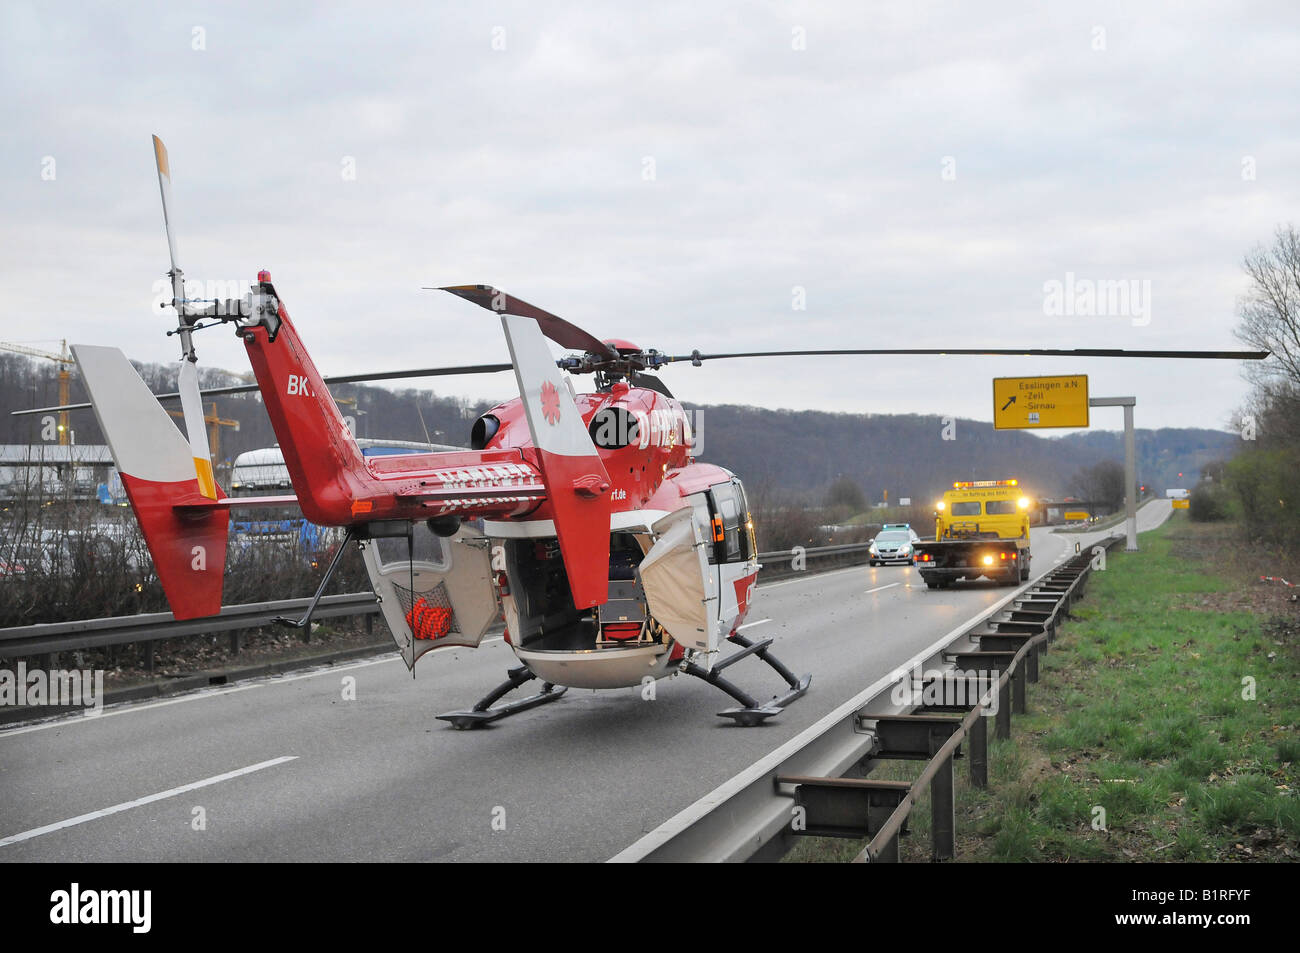 The DRF-Rettungshubschrauber or rescue helicopter of the German Air Rescue at the scene of an accident on the B313 between the  Stock Photo